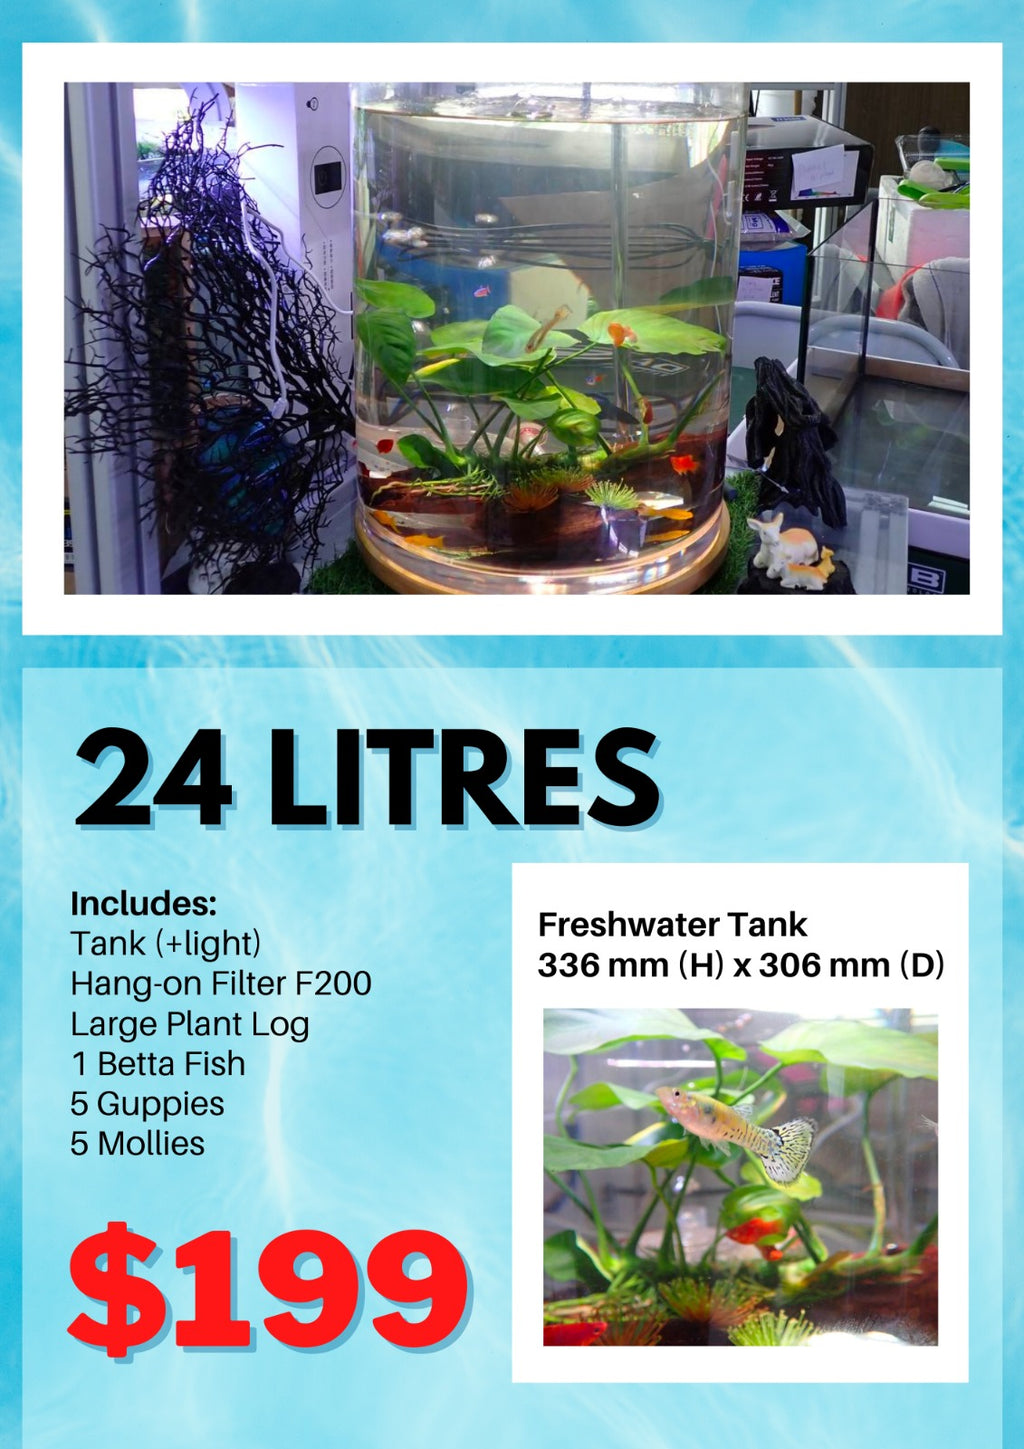 Unbreakable Tank bundle with fish and plants